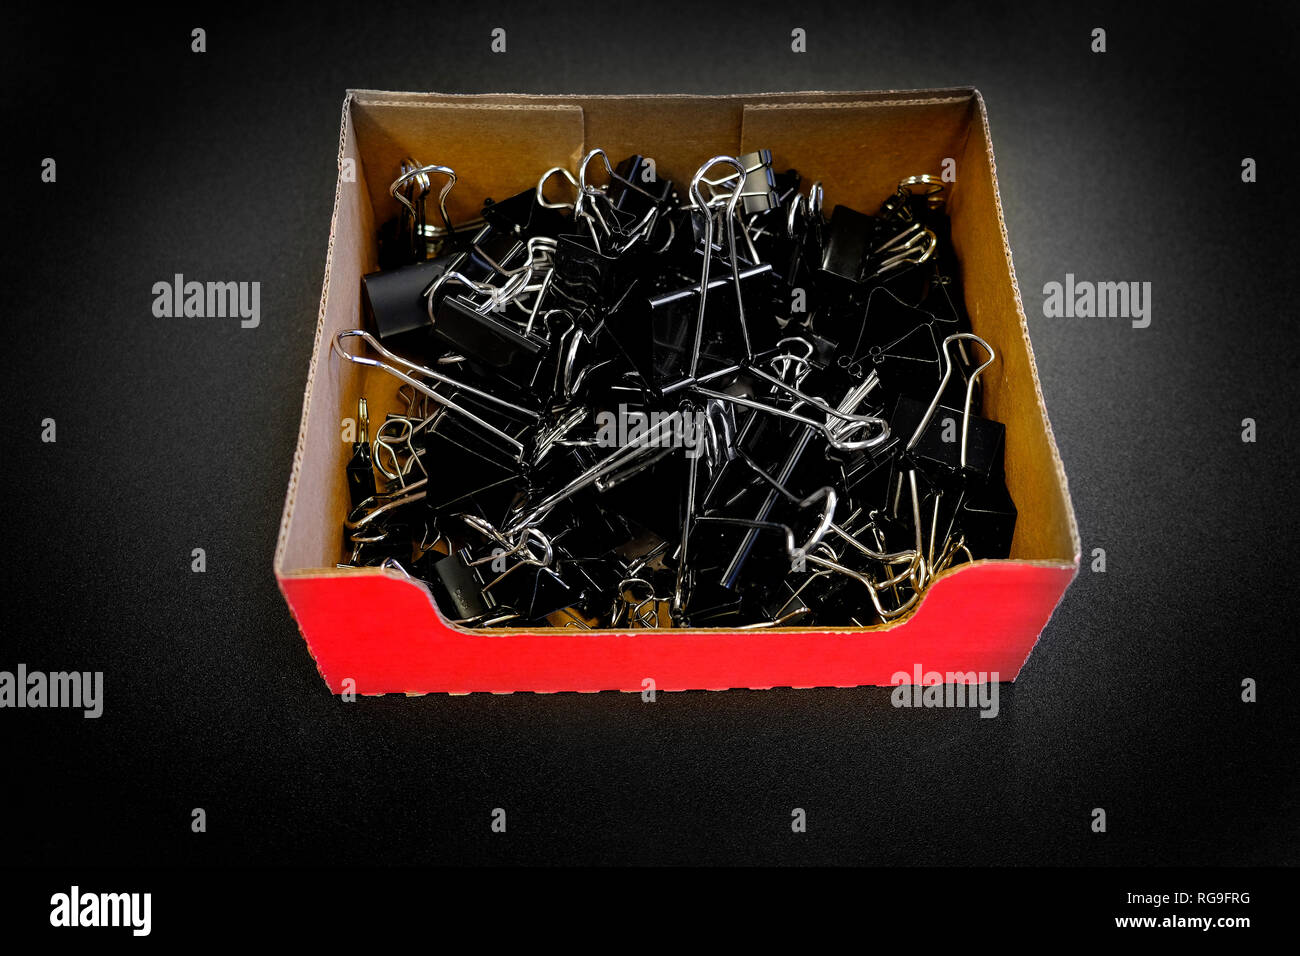 Box of binder clips binderclips office supplies of paperclips on desk Stock Photo